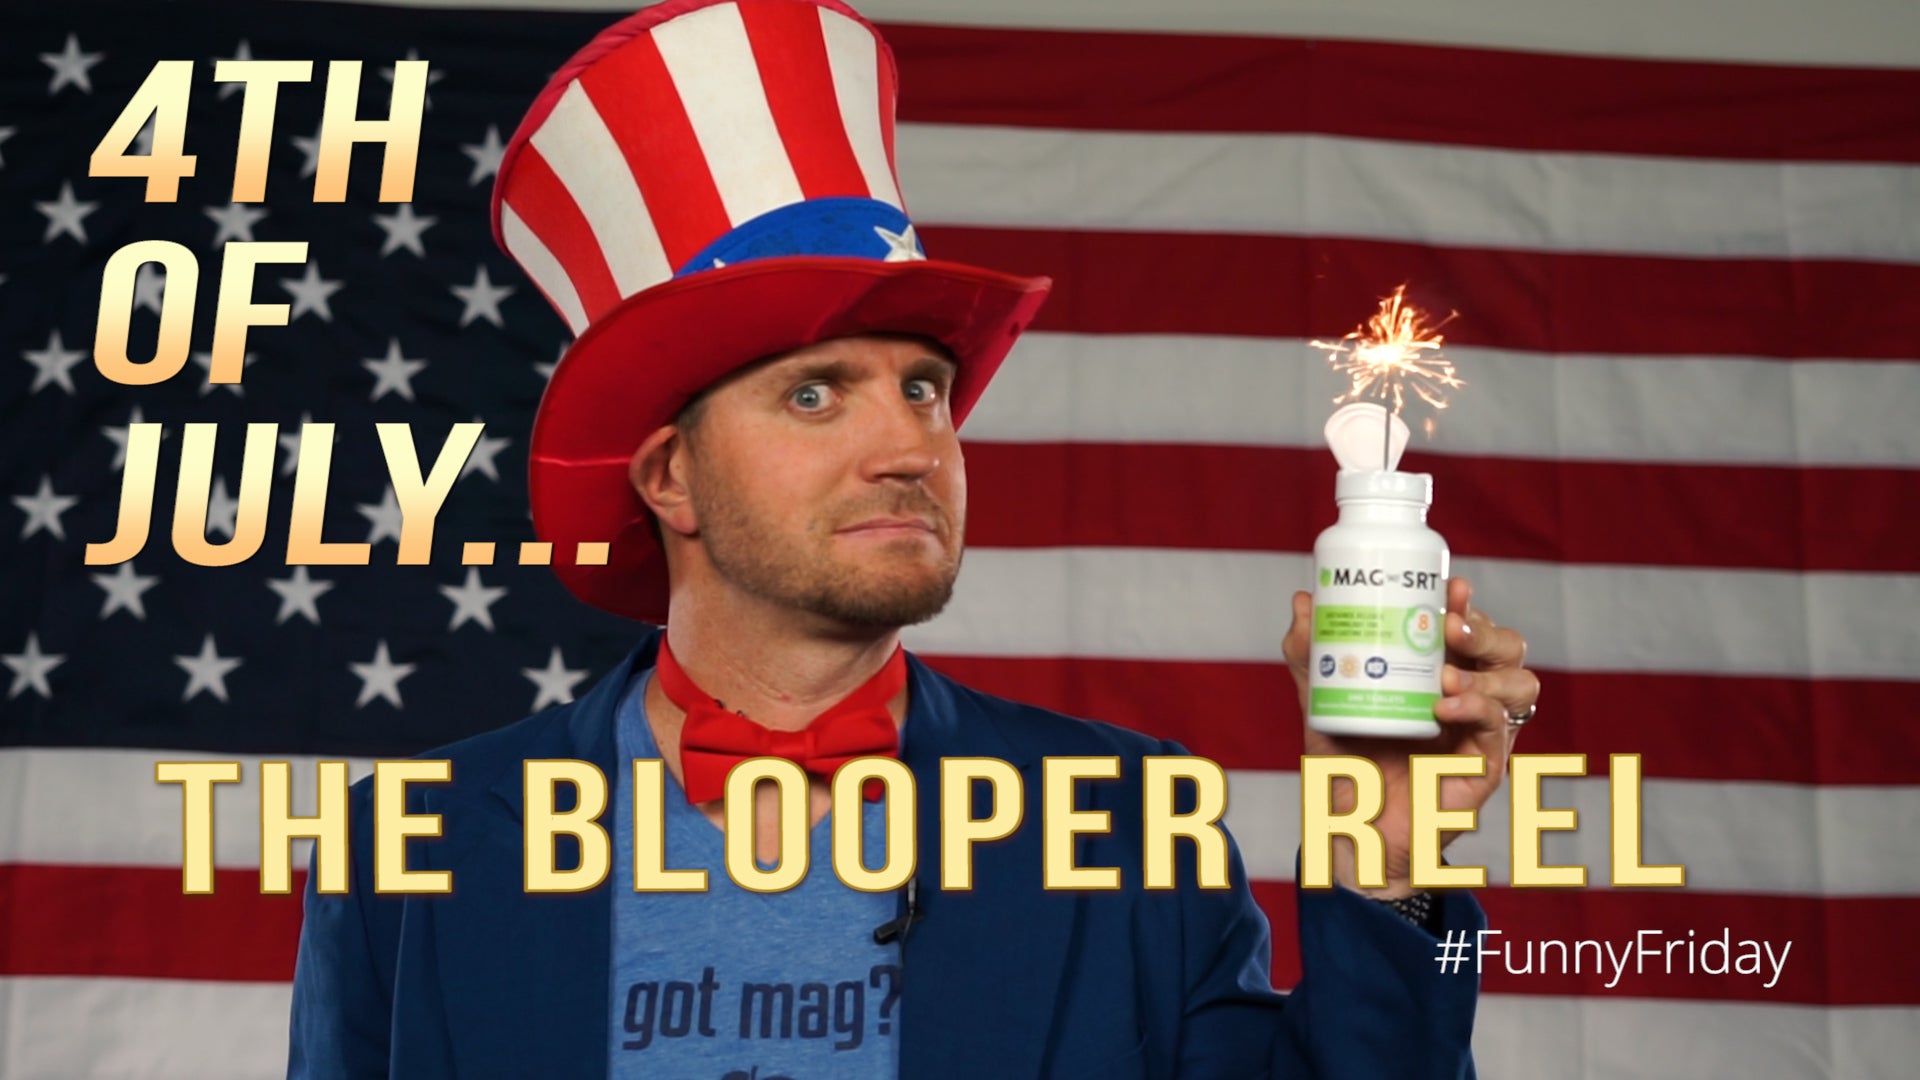 4th of July... The Blooper Reel | #FunnyFriday